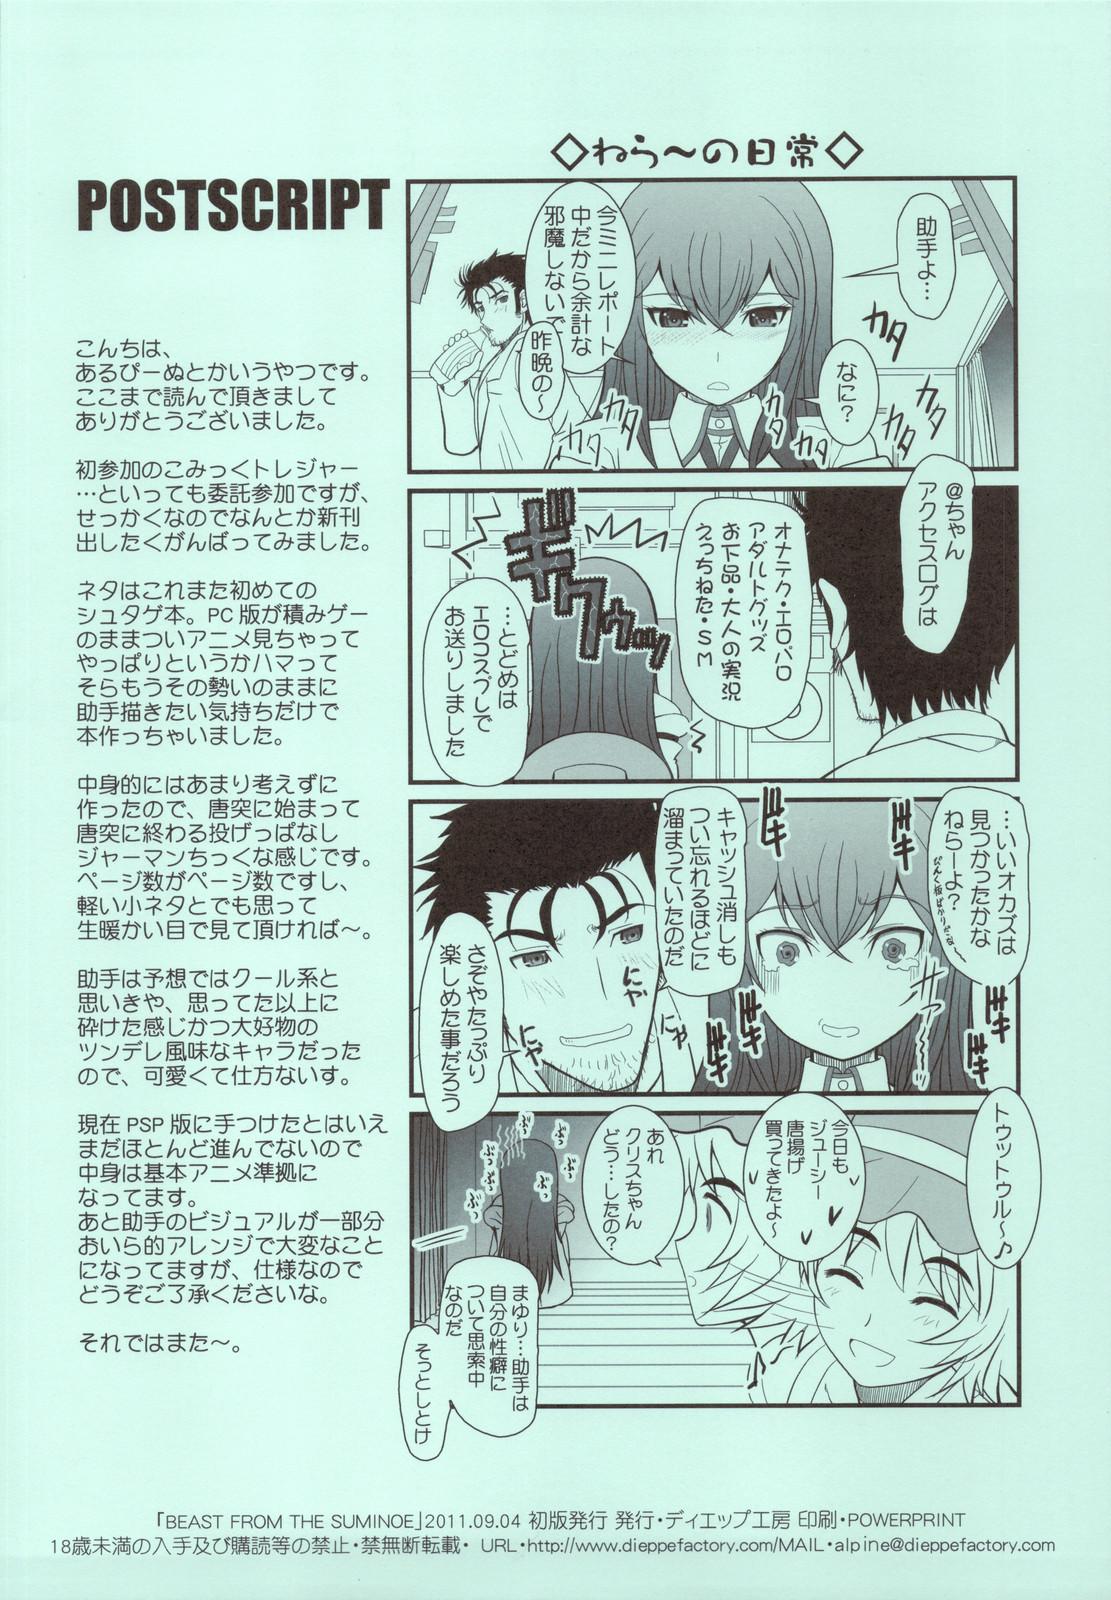 Highschool BEAST FROM THE SUMINOE - Steinsgate Adult Toys - Page 8